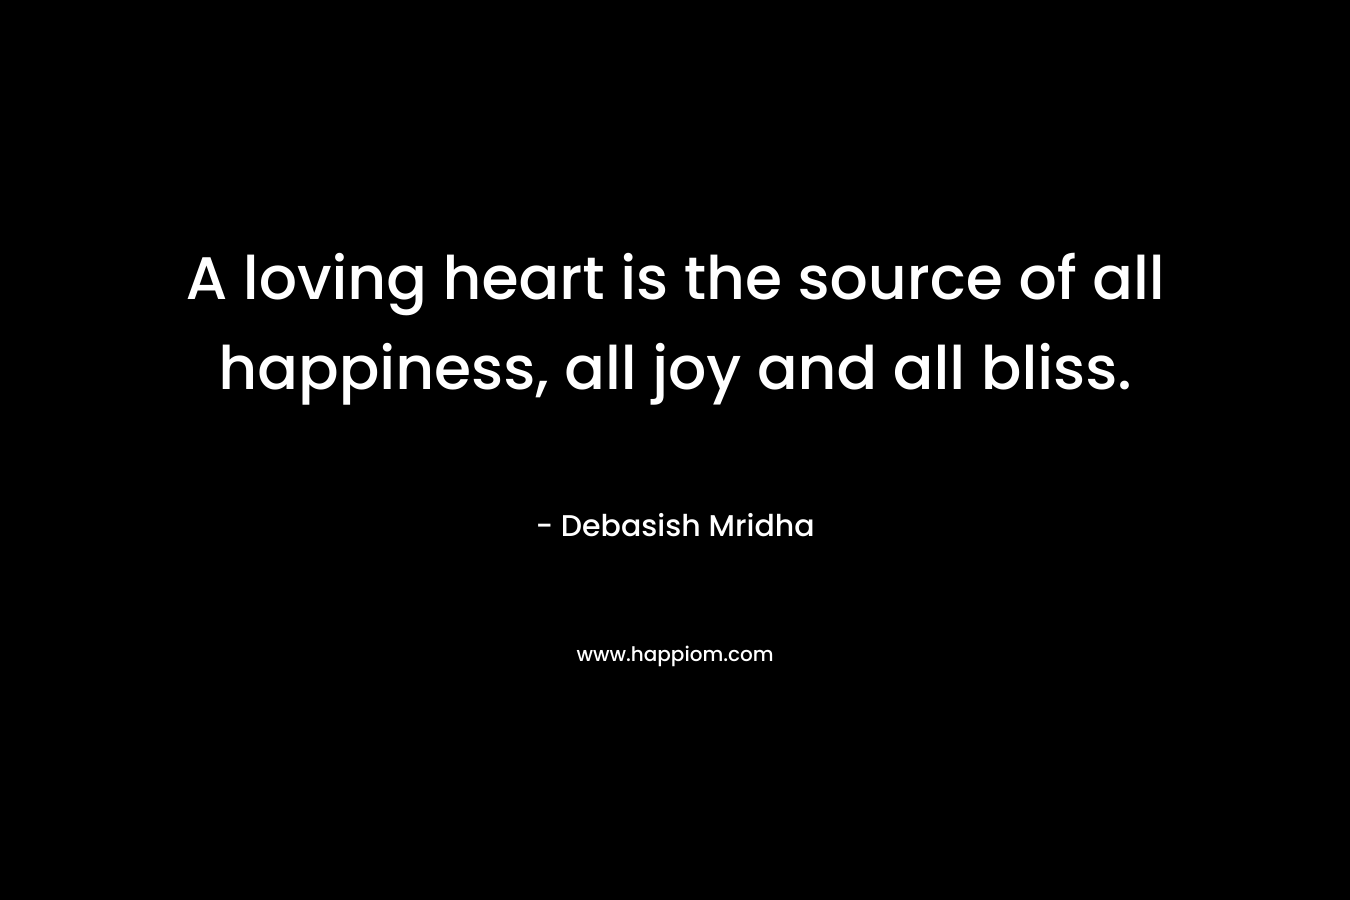 A loving heart is the source of all happiness, all joy and all bliss.